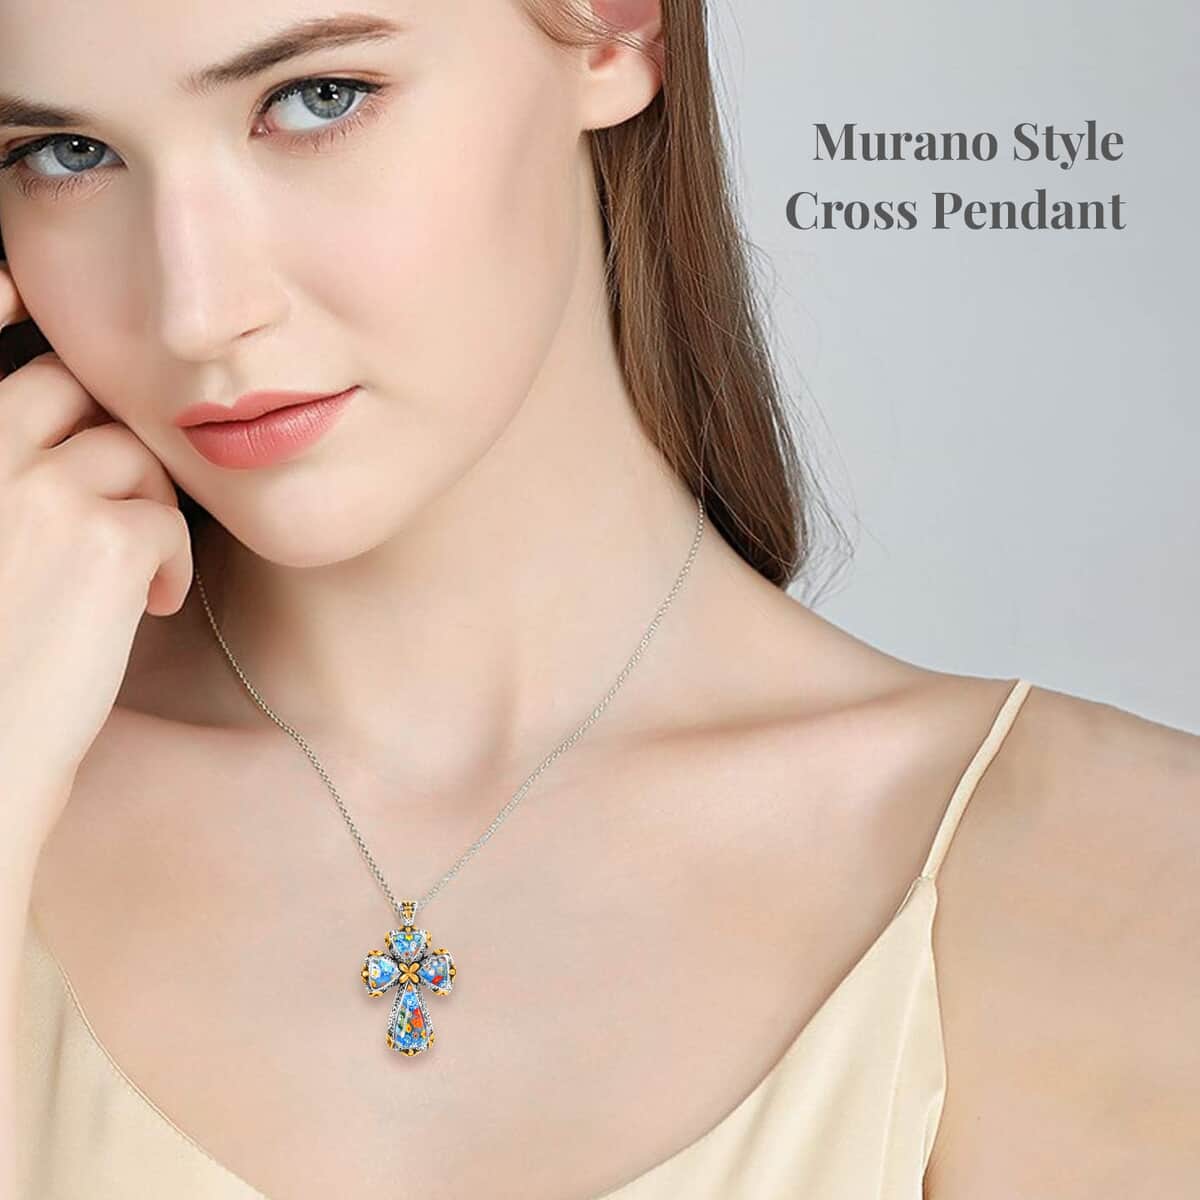 Murano Style Cross Pendant Necklace For Women in ION Plated YG Stainless Steel, Floral Millefiori Pendant Necklace, Sweatproof Hypoallergenic Necklace, Gift For Her image number 2